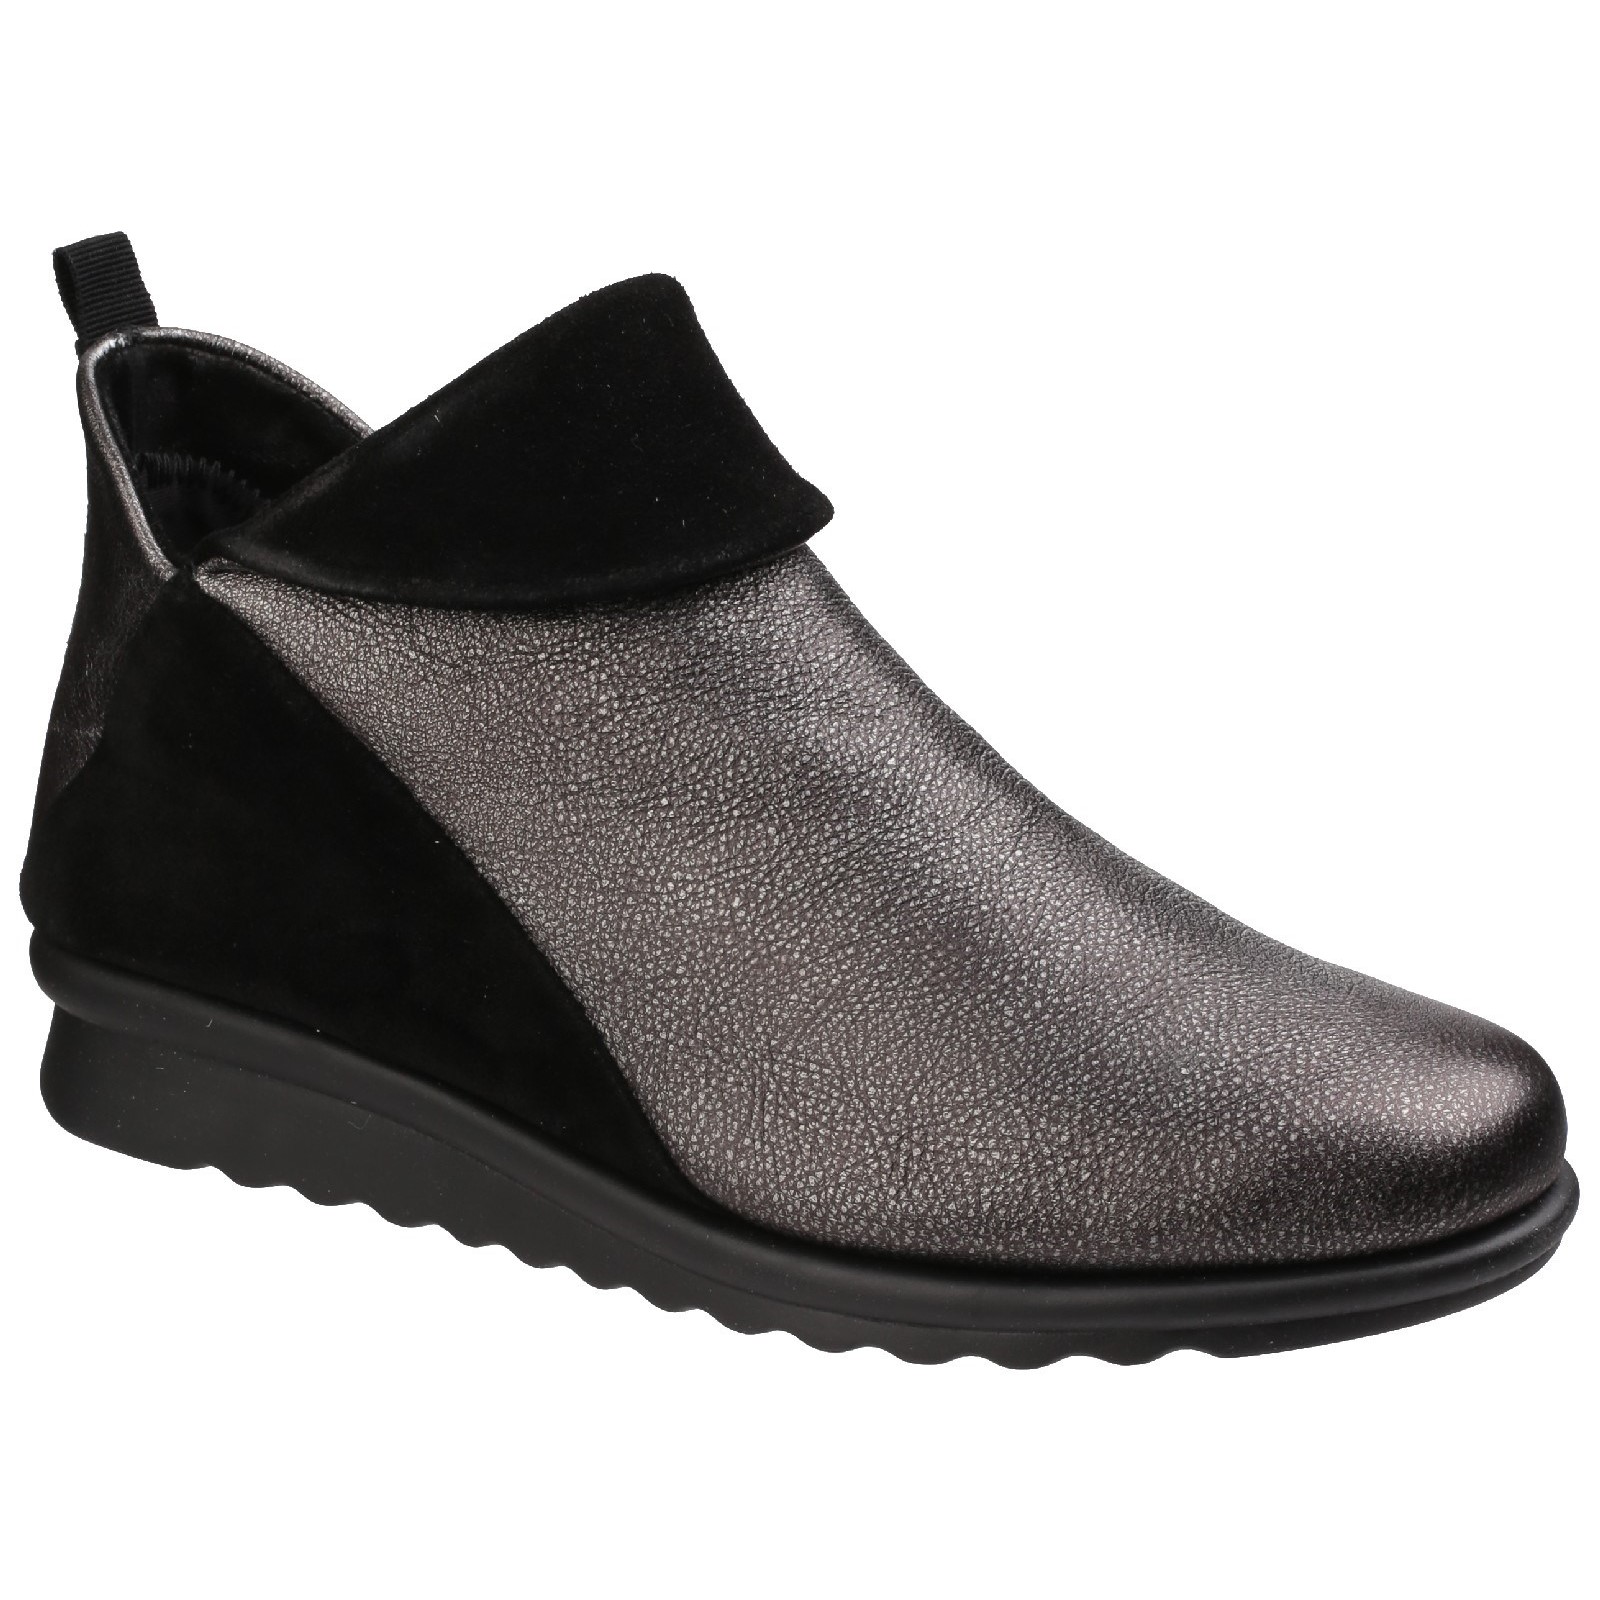 Pam Damme Saturno Boot